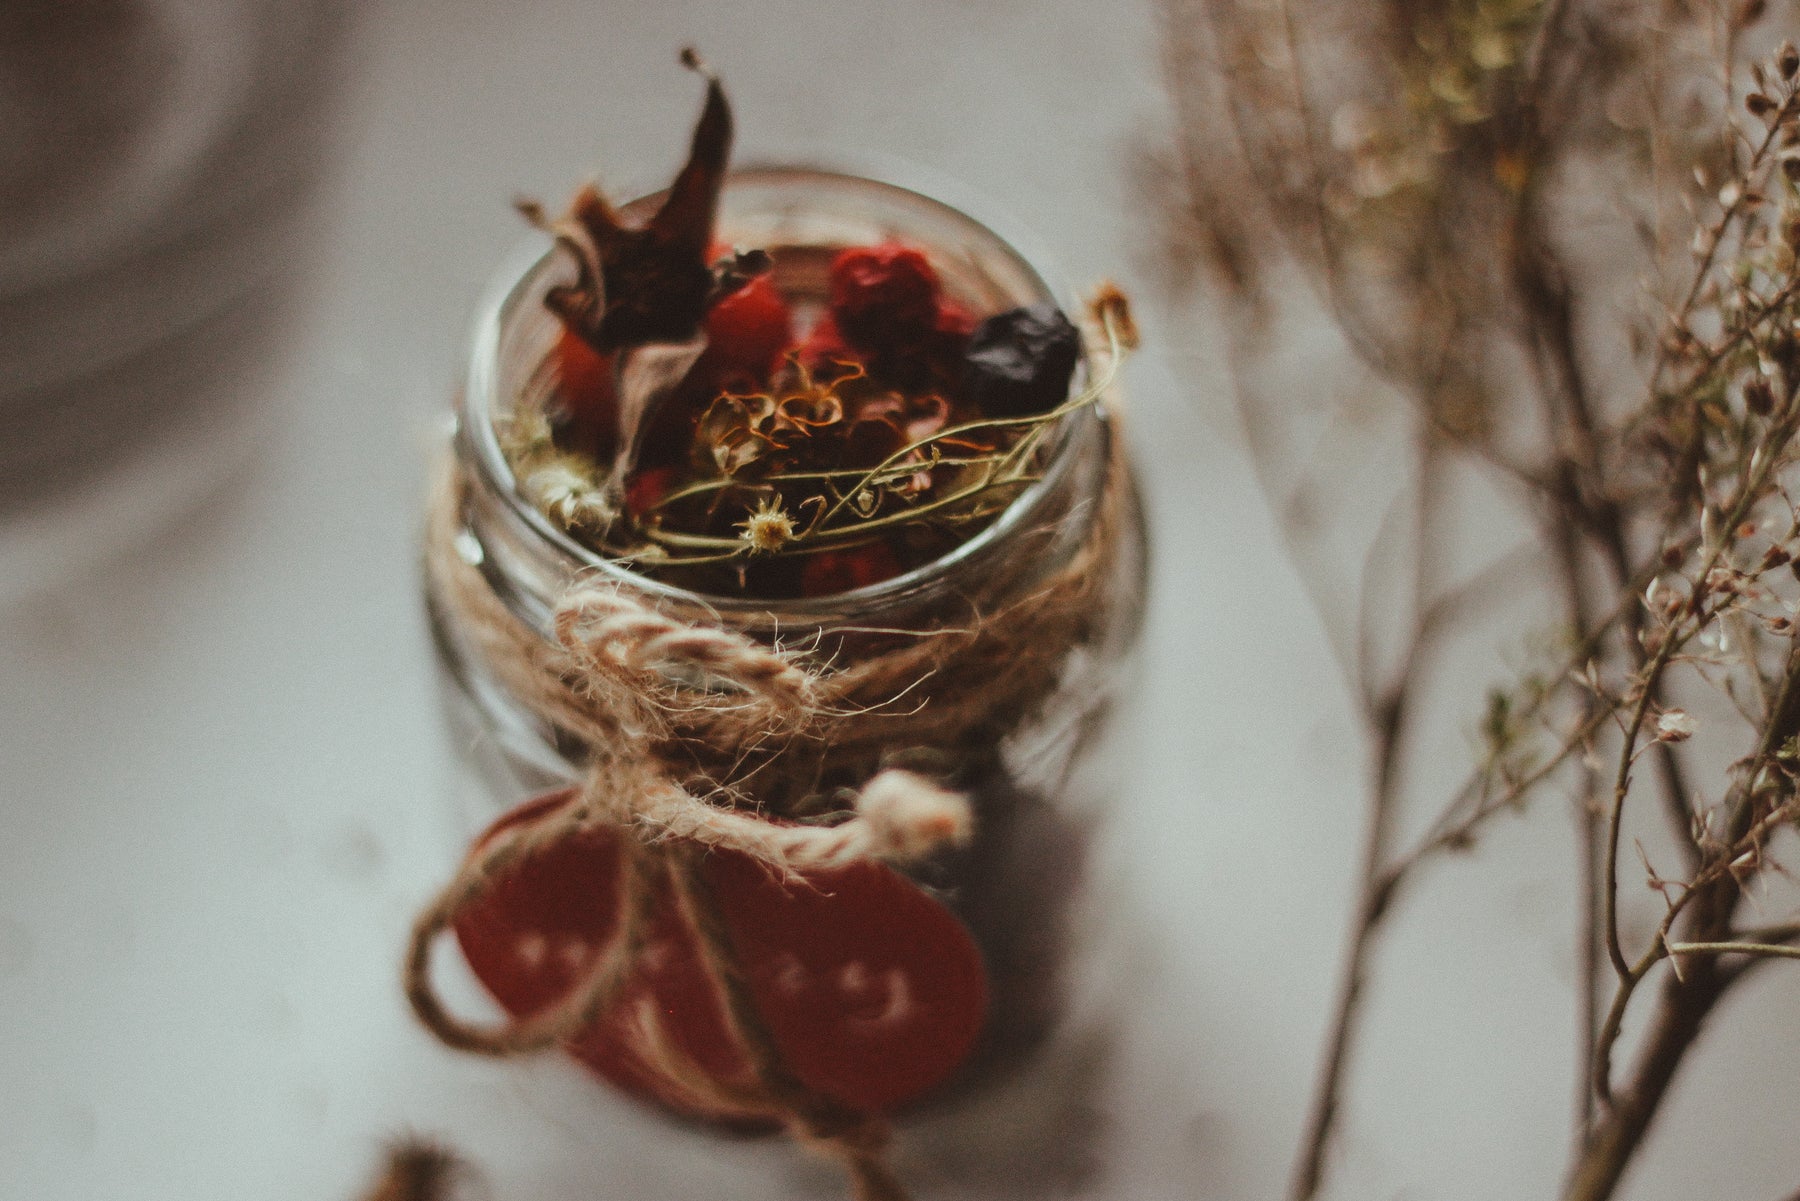 Herbs Used in Witchcraft